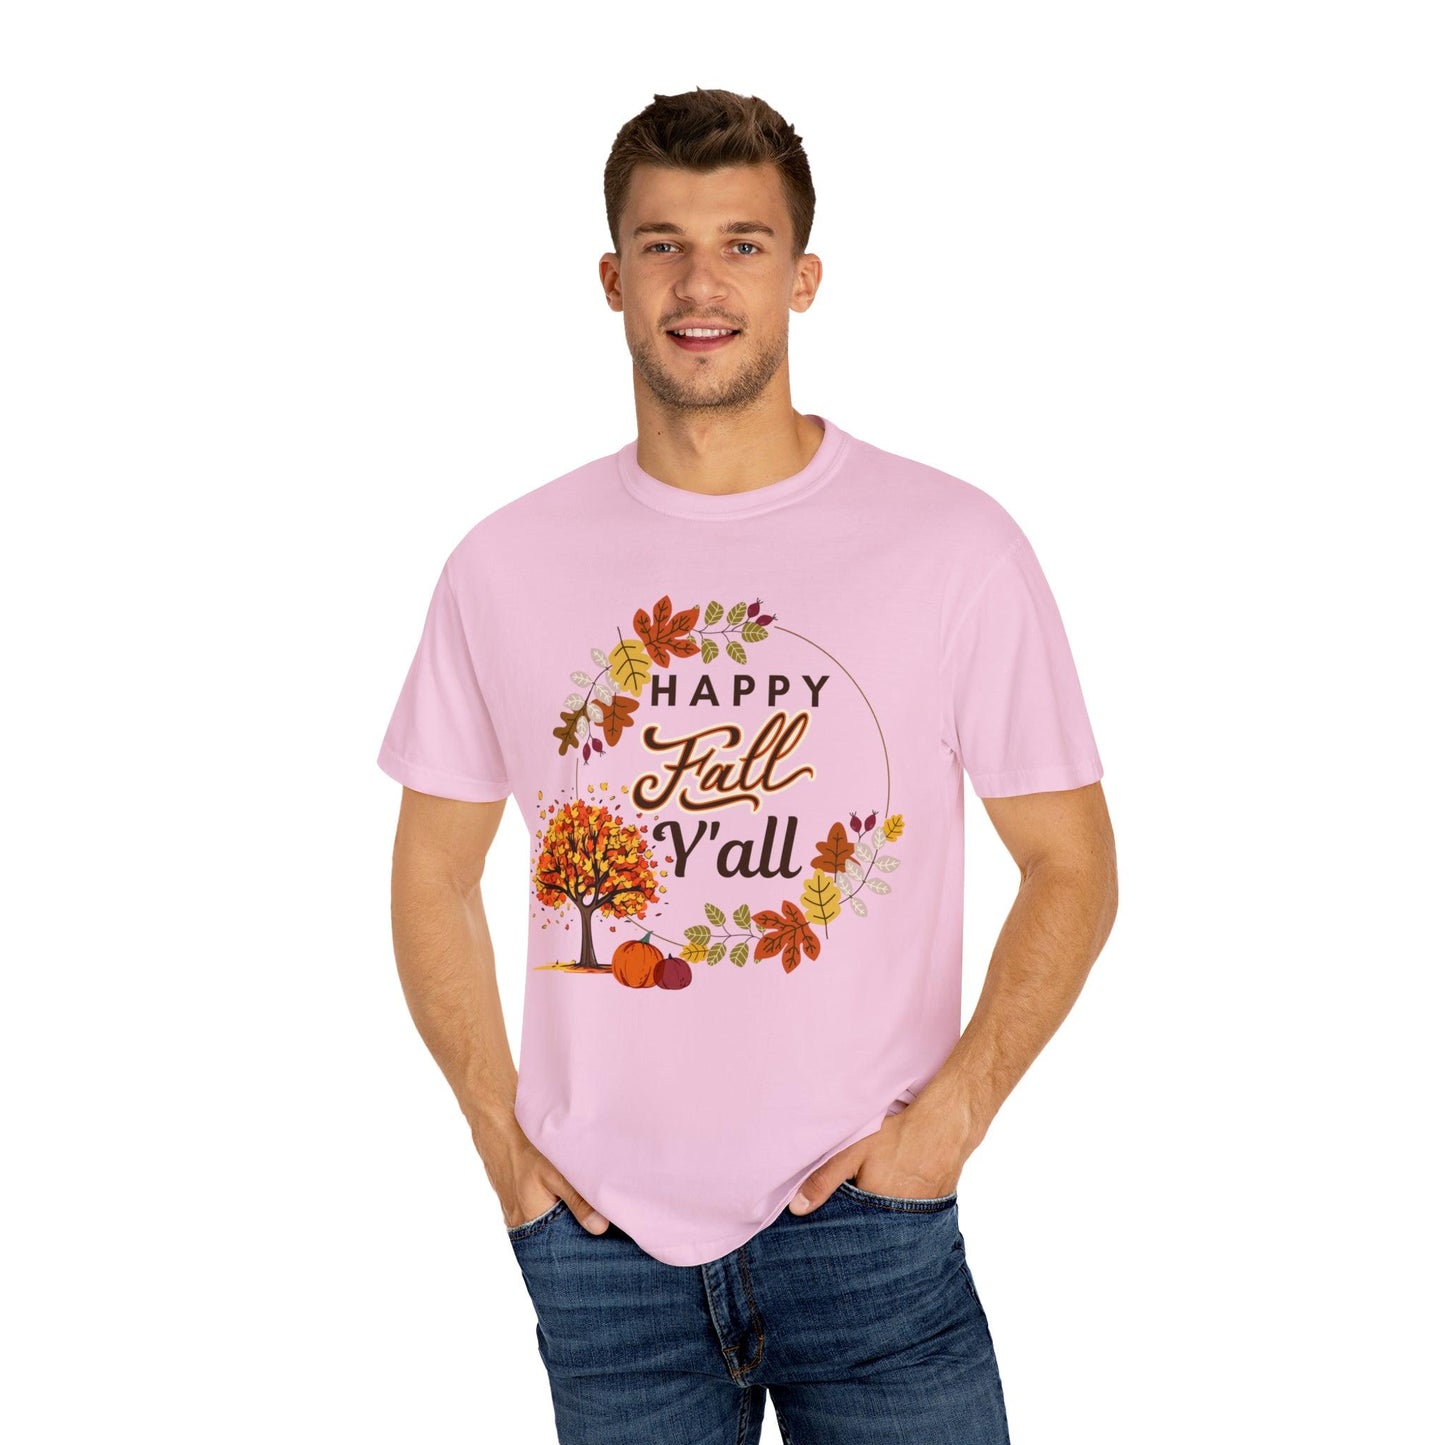 Happy Fall Y'all Gift for Fall, Funny Fall Shirts Gift, Autumn Tee, Fall TShirt